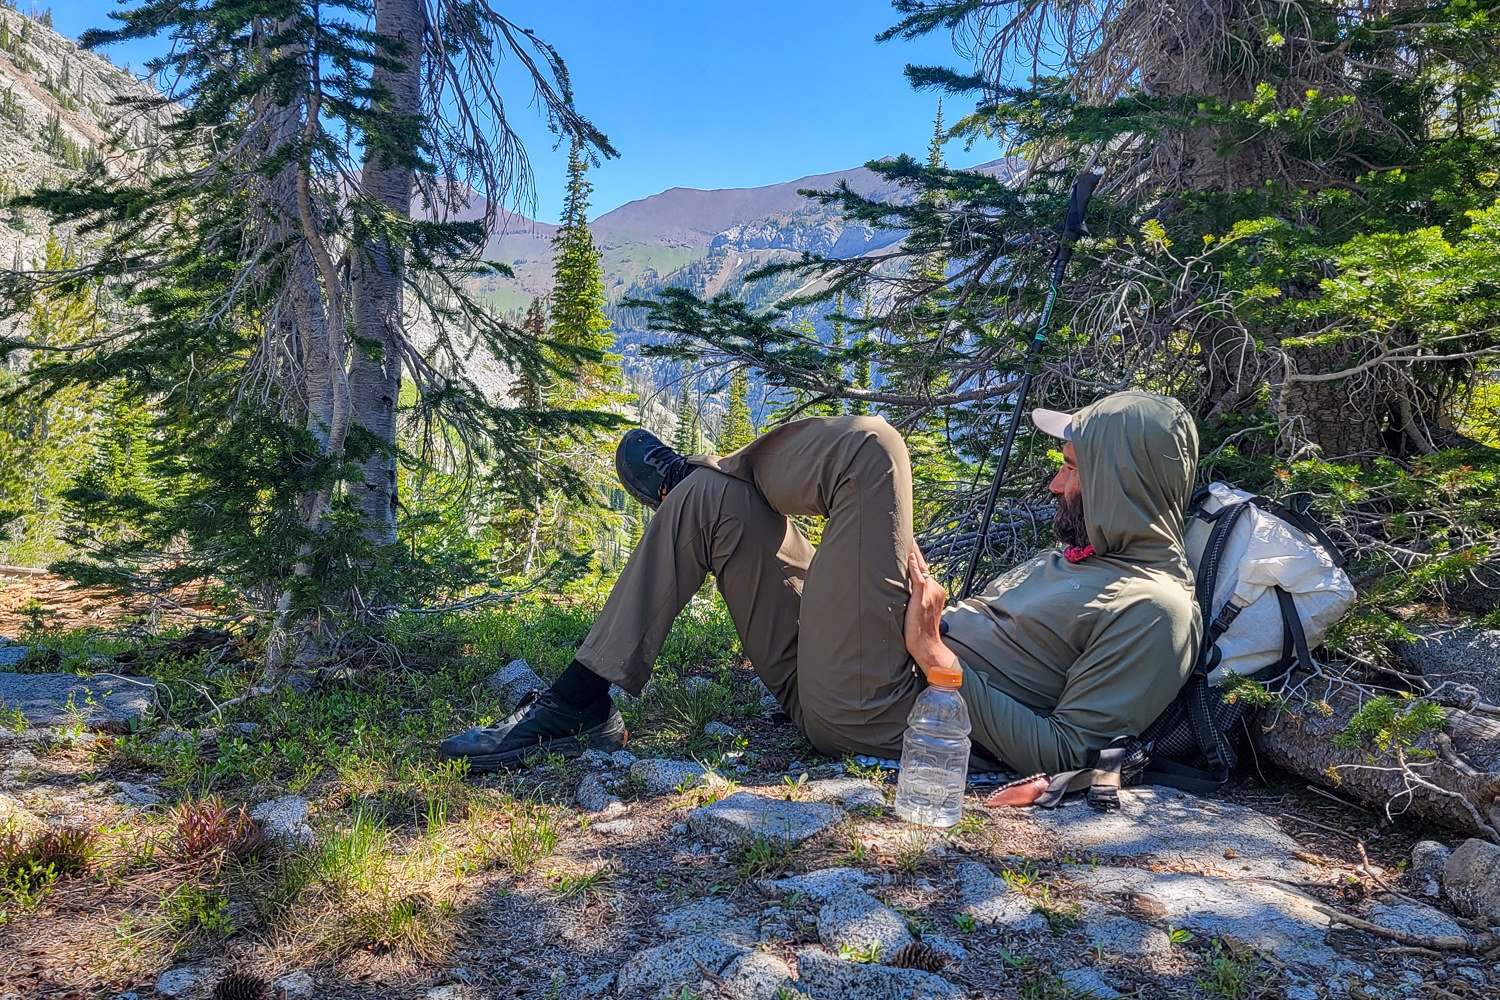 A hiker lounging against his backpack with his feet up, there's a mountain view in the background